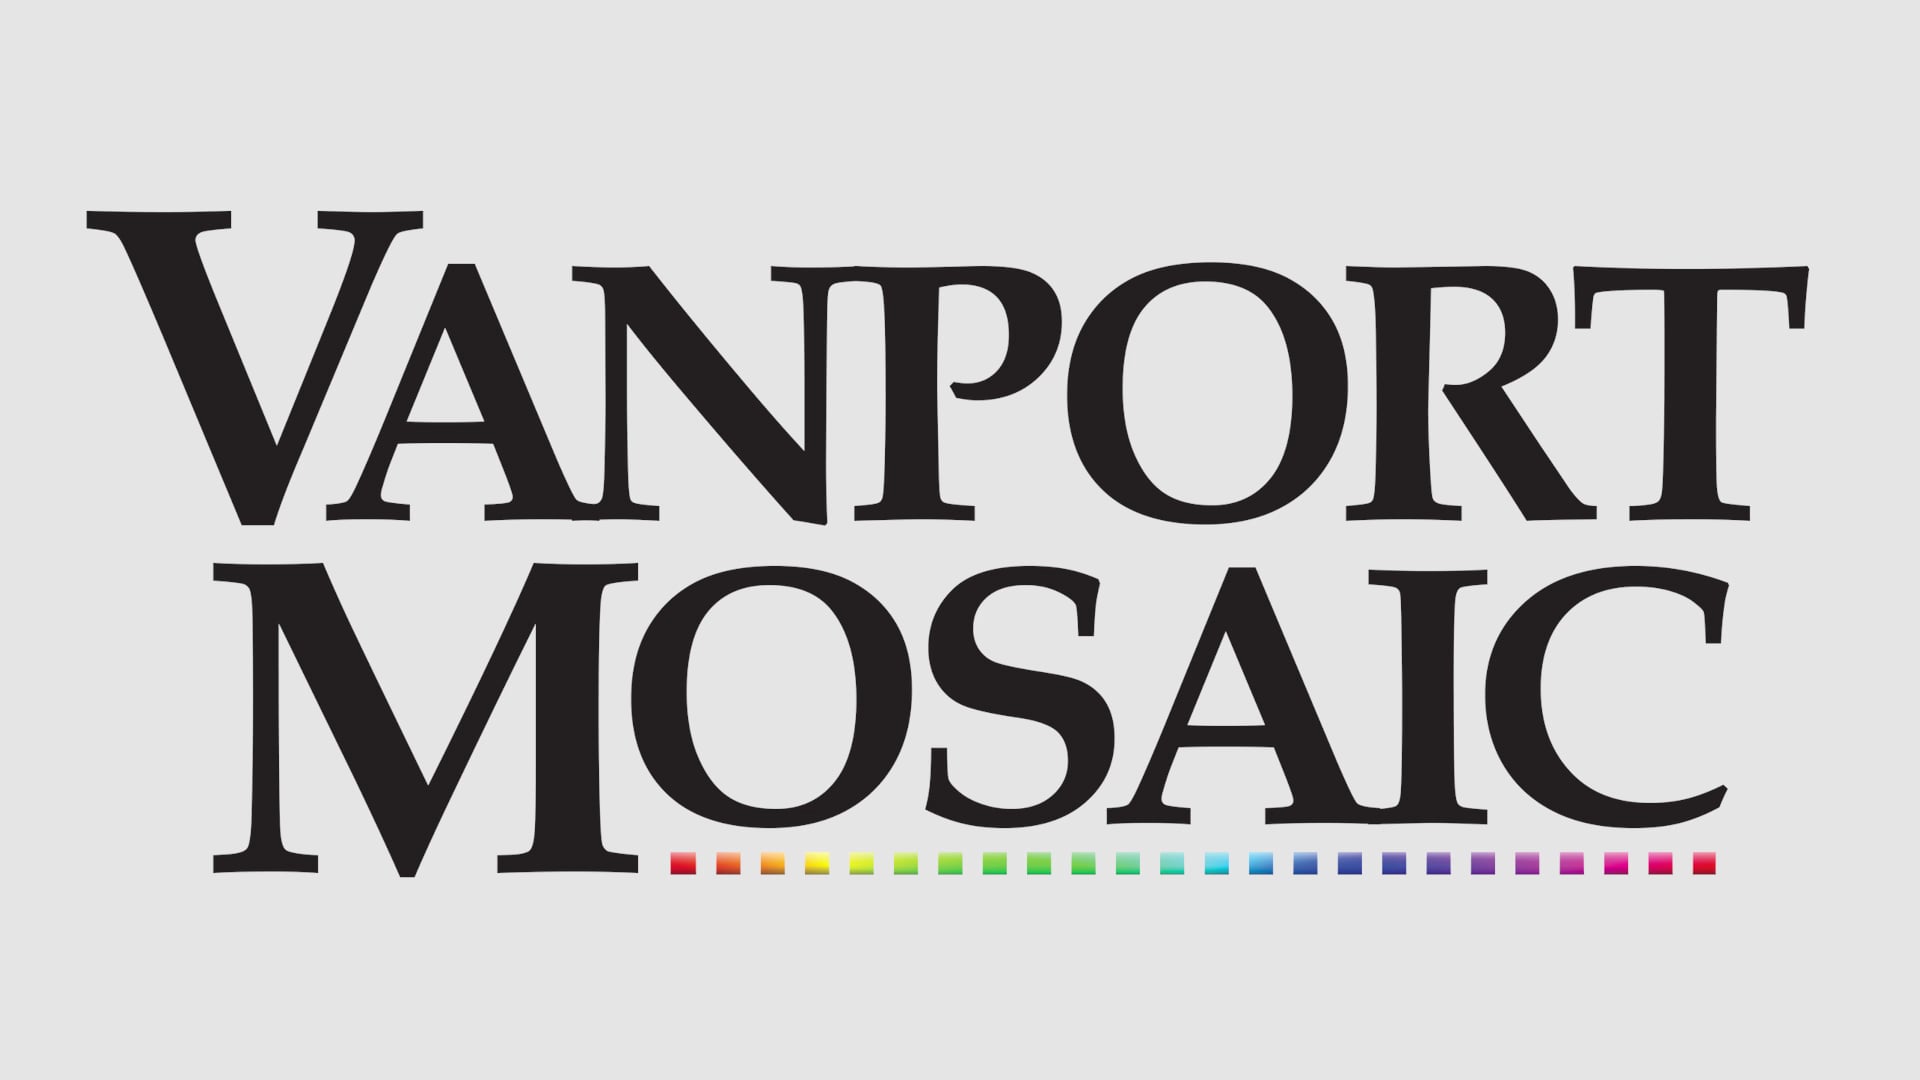 UO Master's Students partner up with Vanport Mosaic